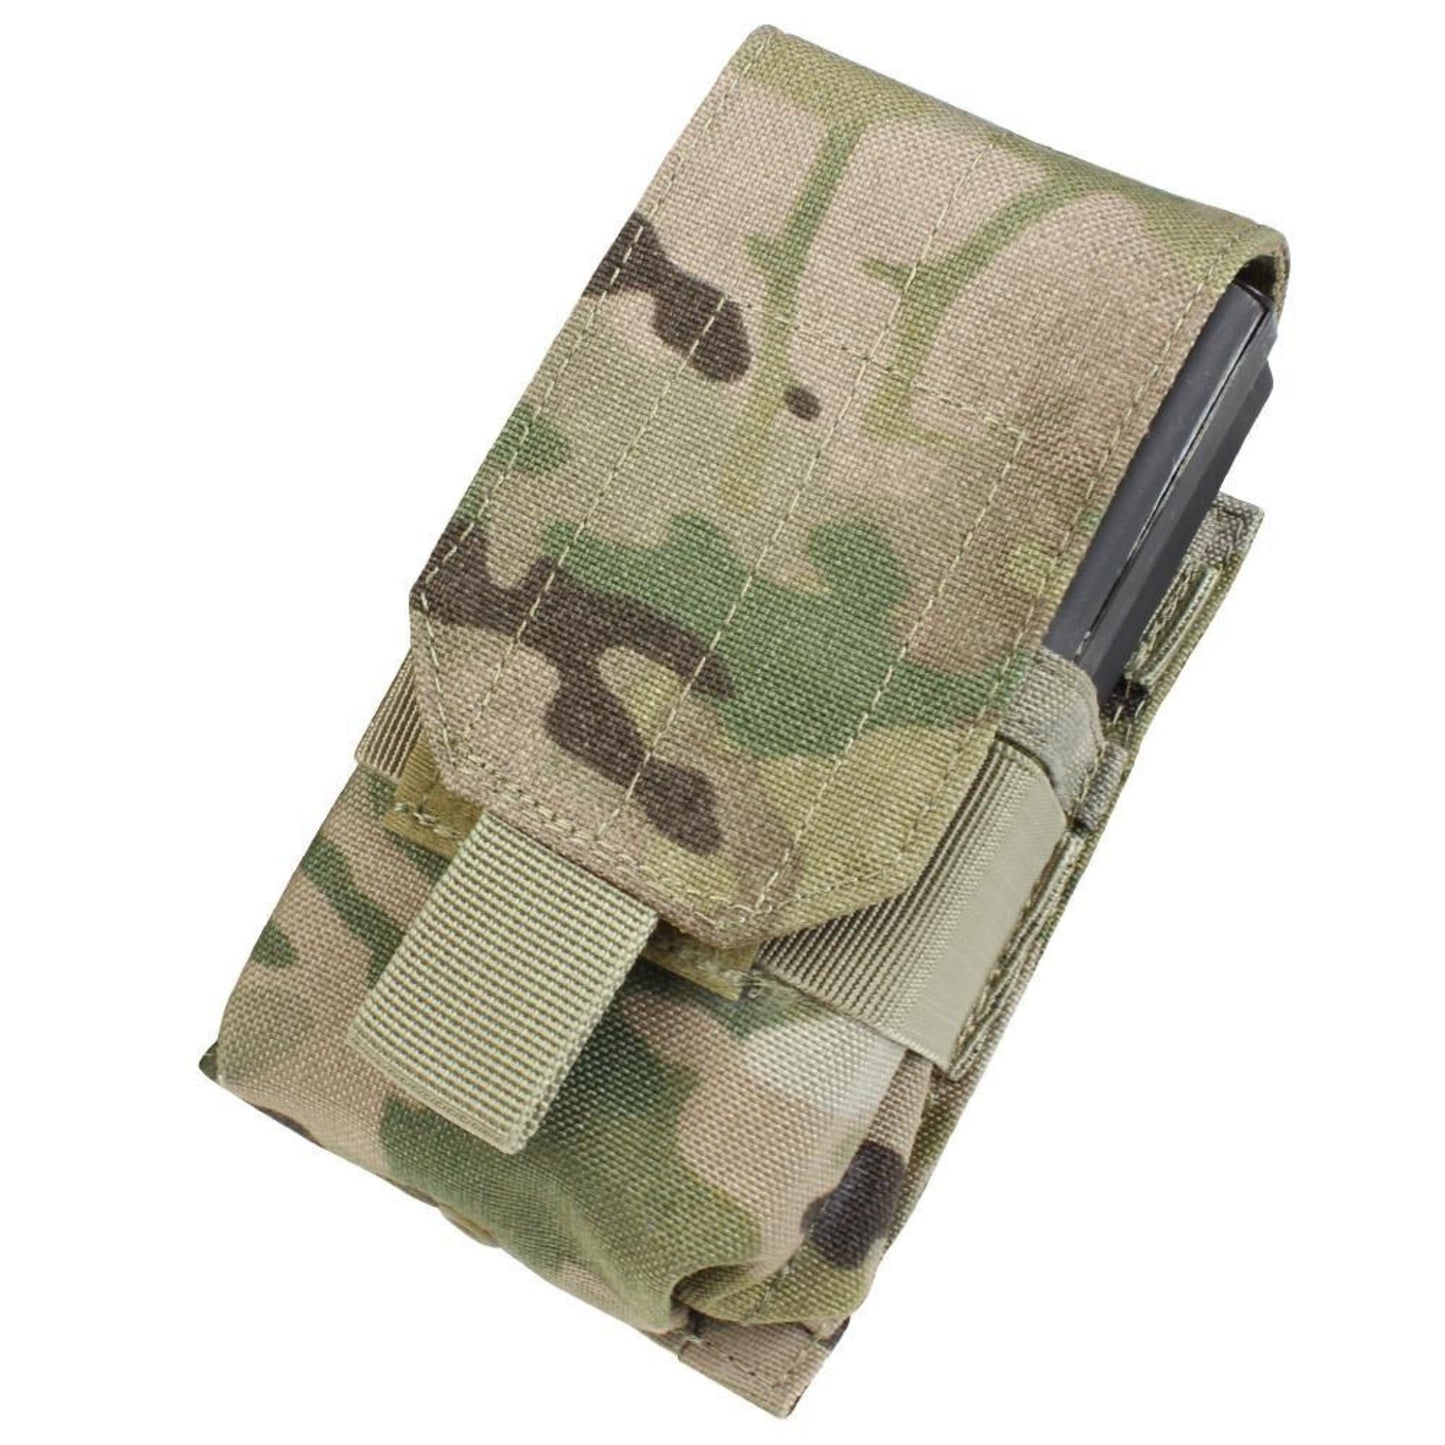 Image of the Single M14 Mag Pouch-Gen II in camoflage.